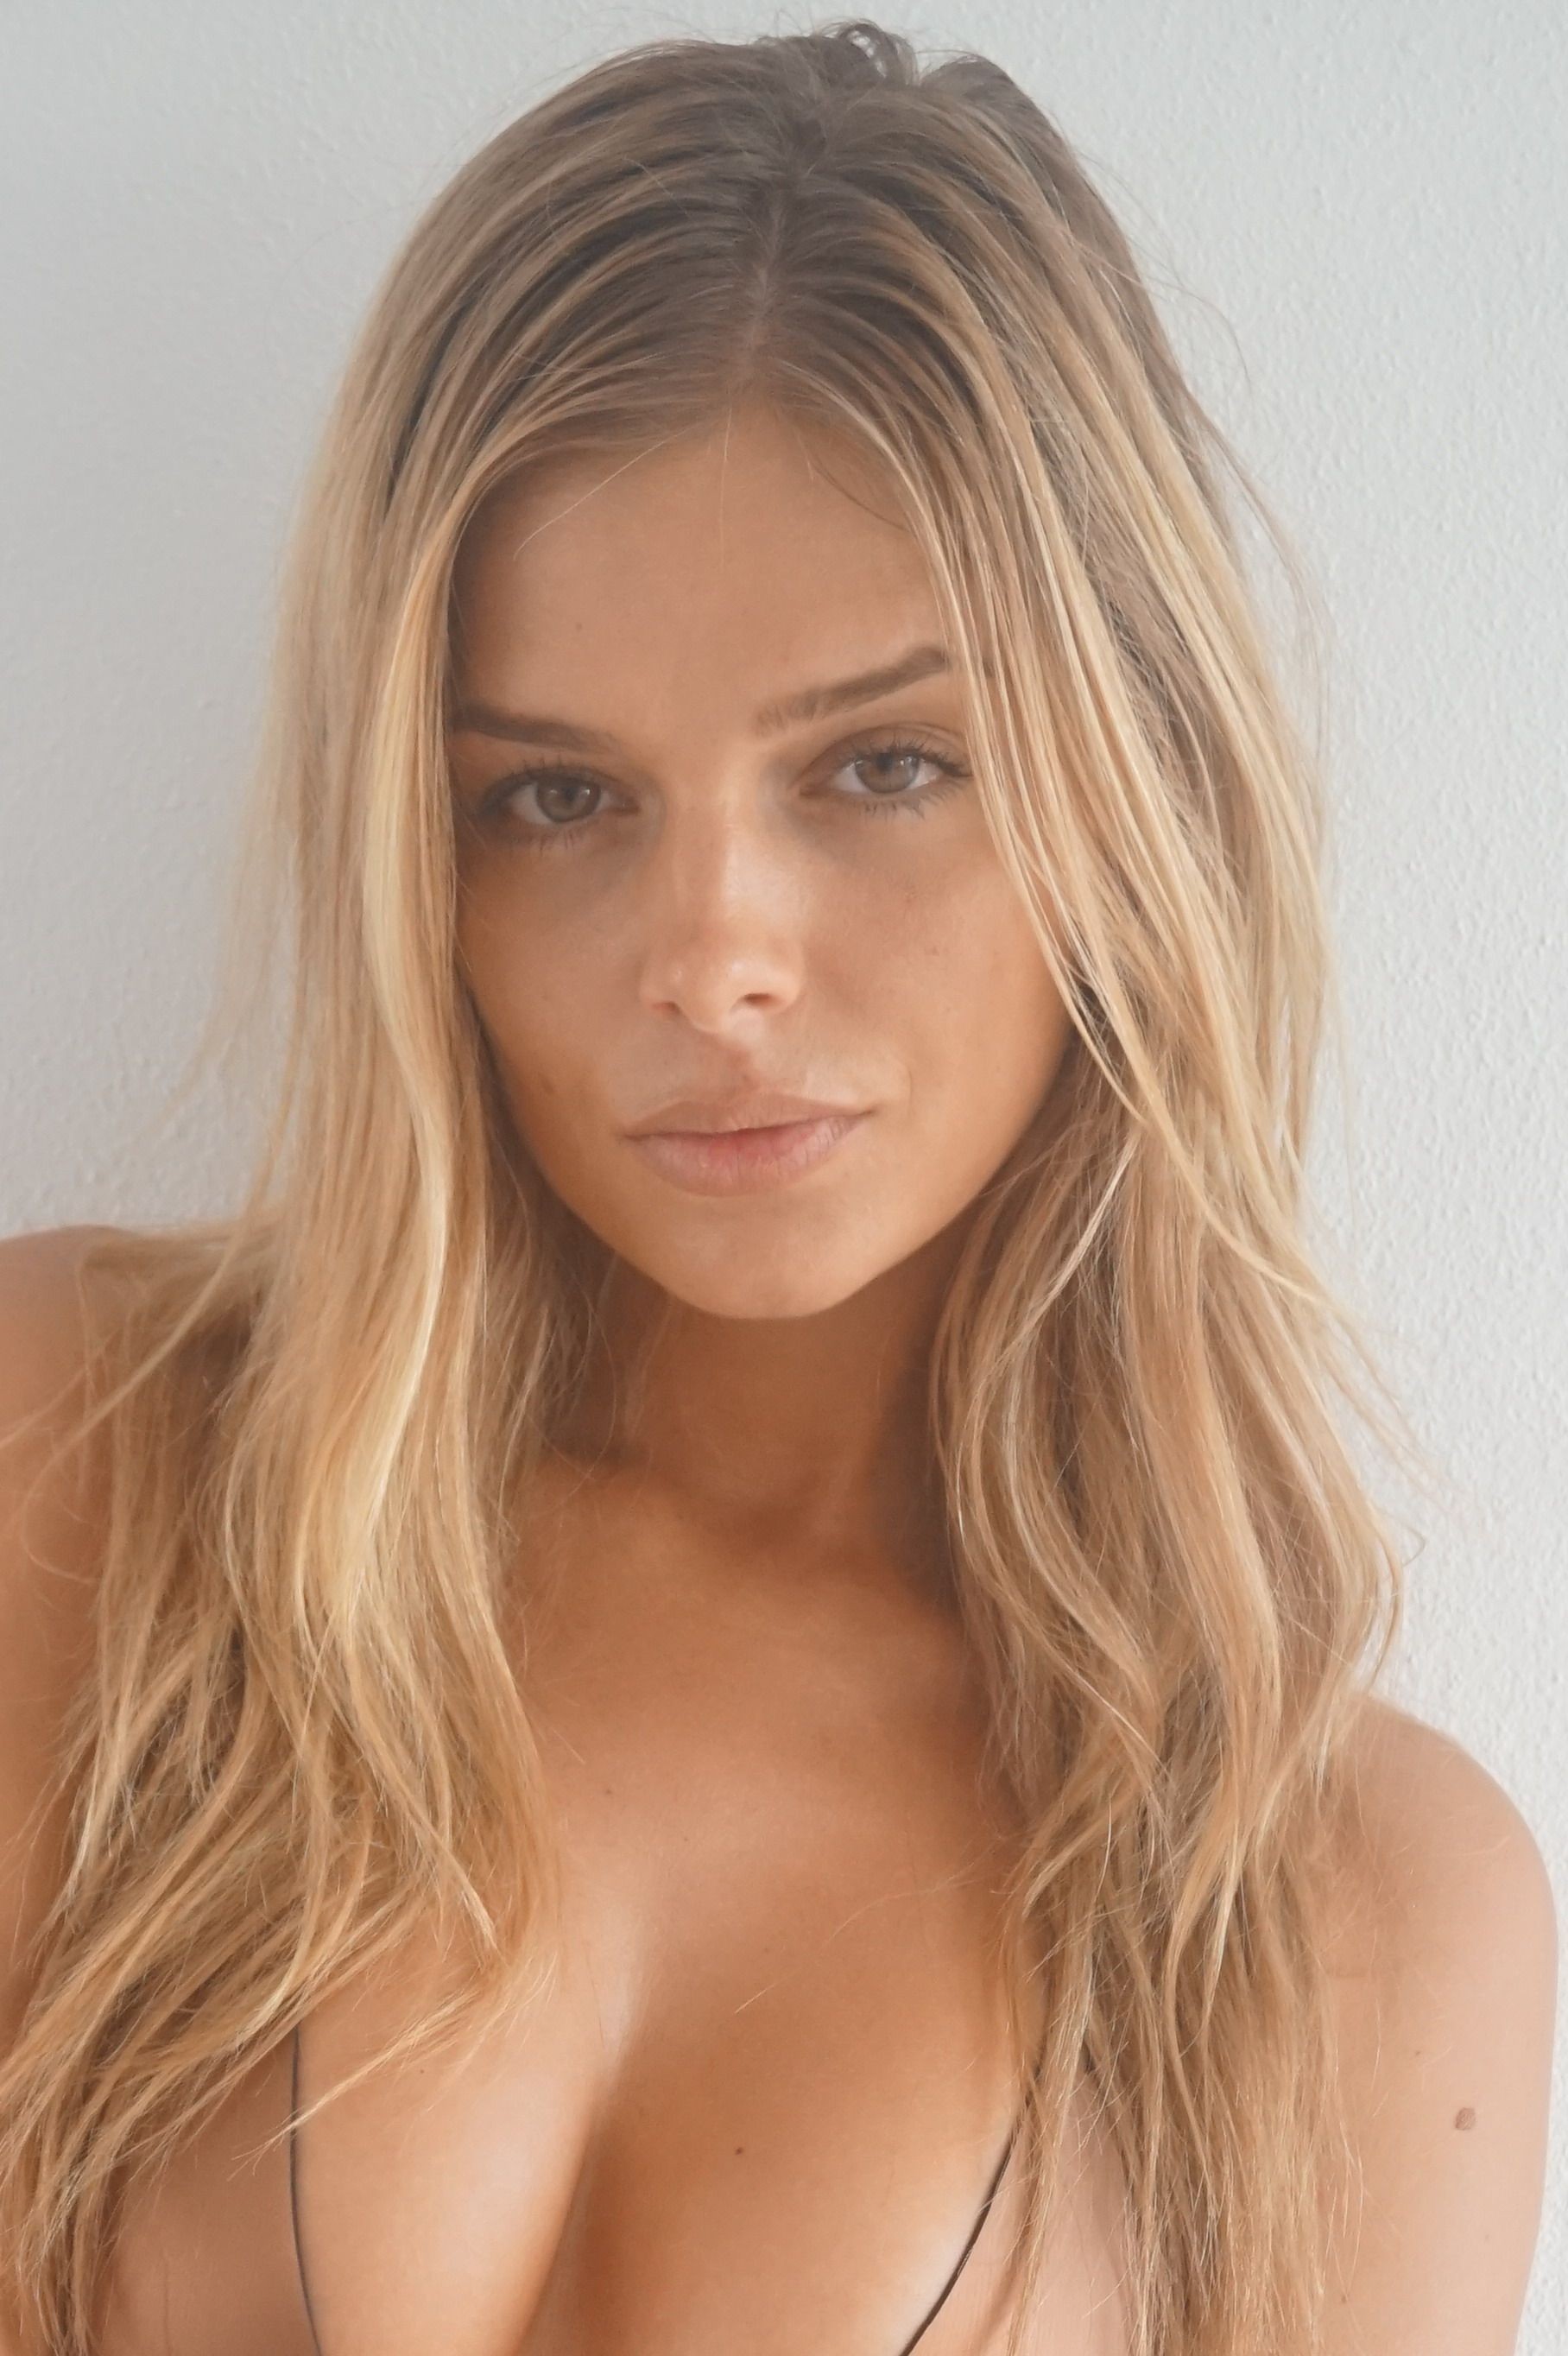 1677773535 874 Danielle Knudson Nude TheFappening 68 - Danielle Knudson Nude Leaked (Over 200 Photos!)